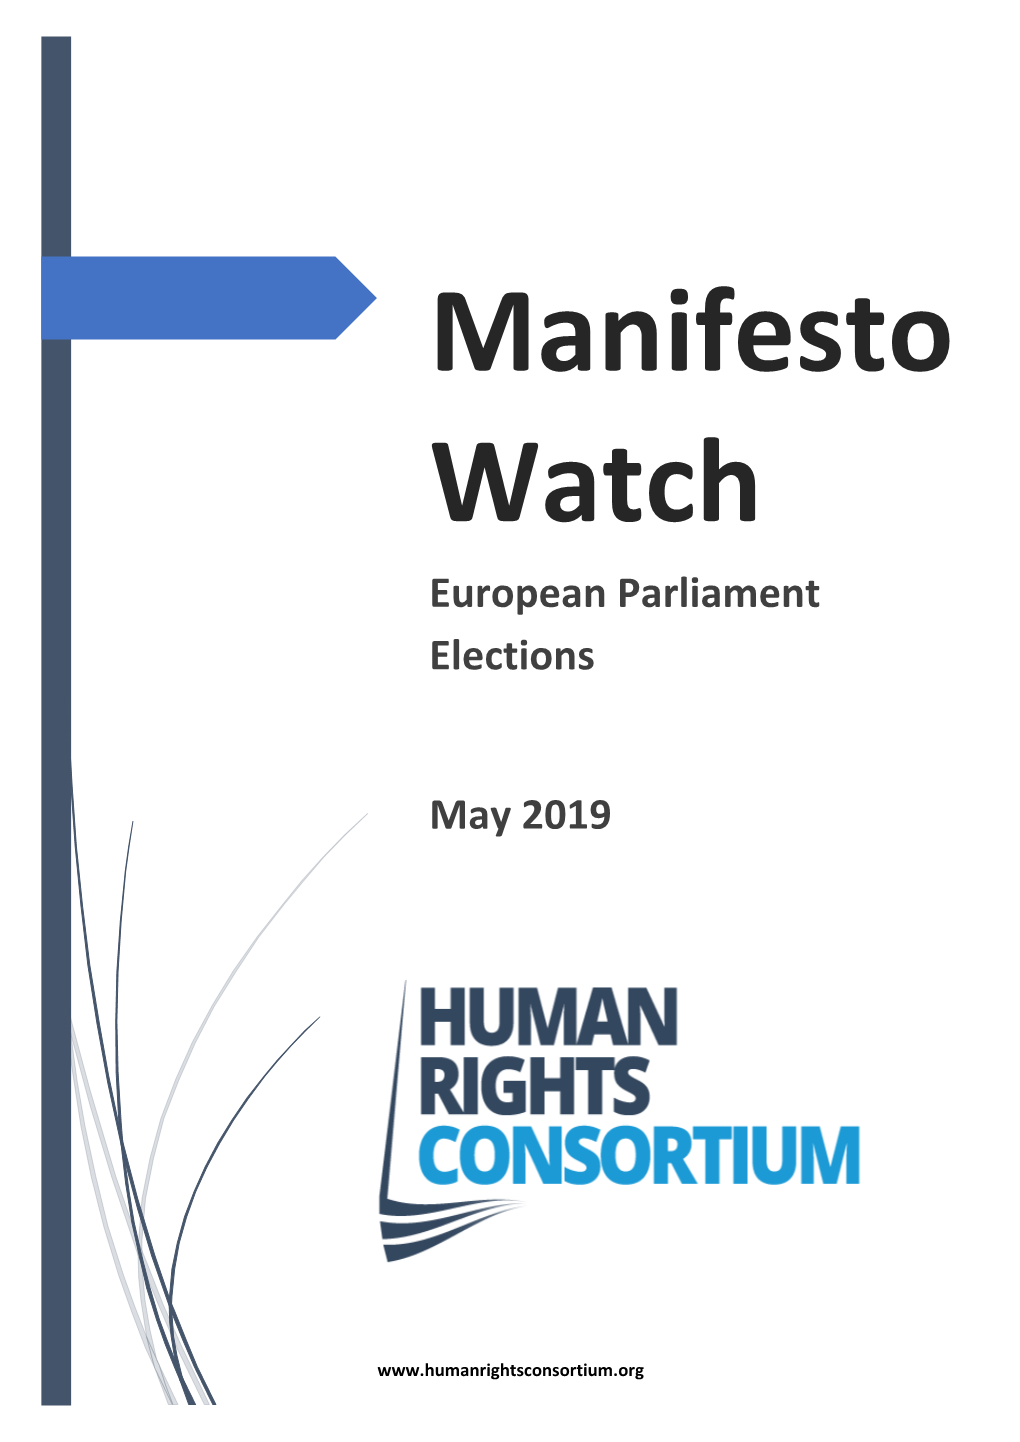 European Parliament Elections May 2019